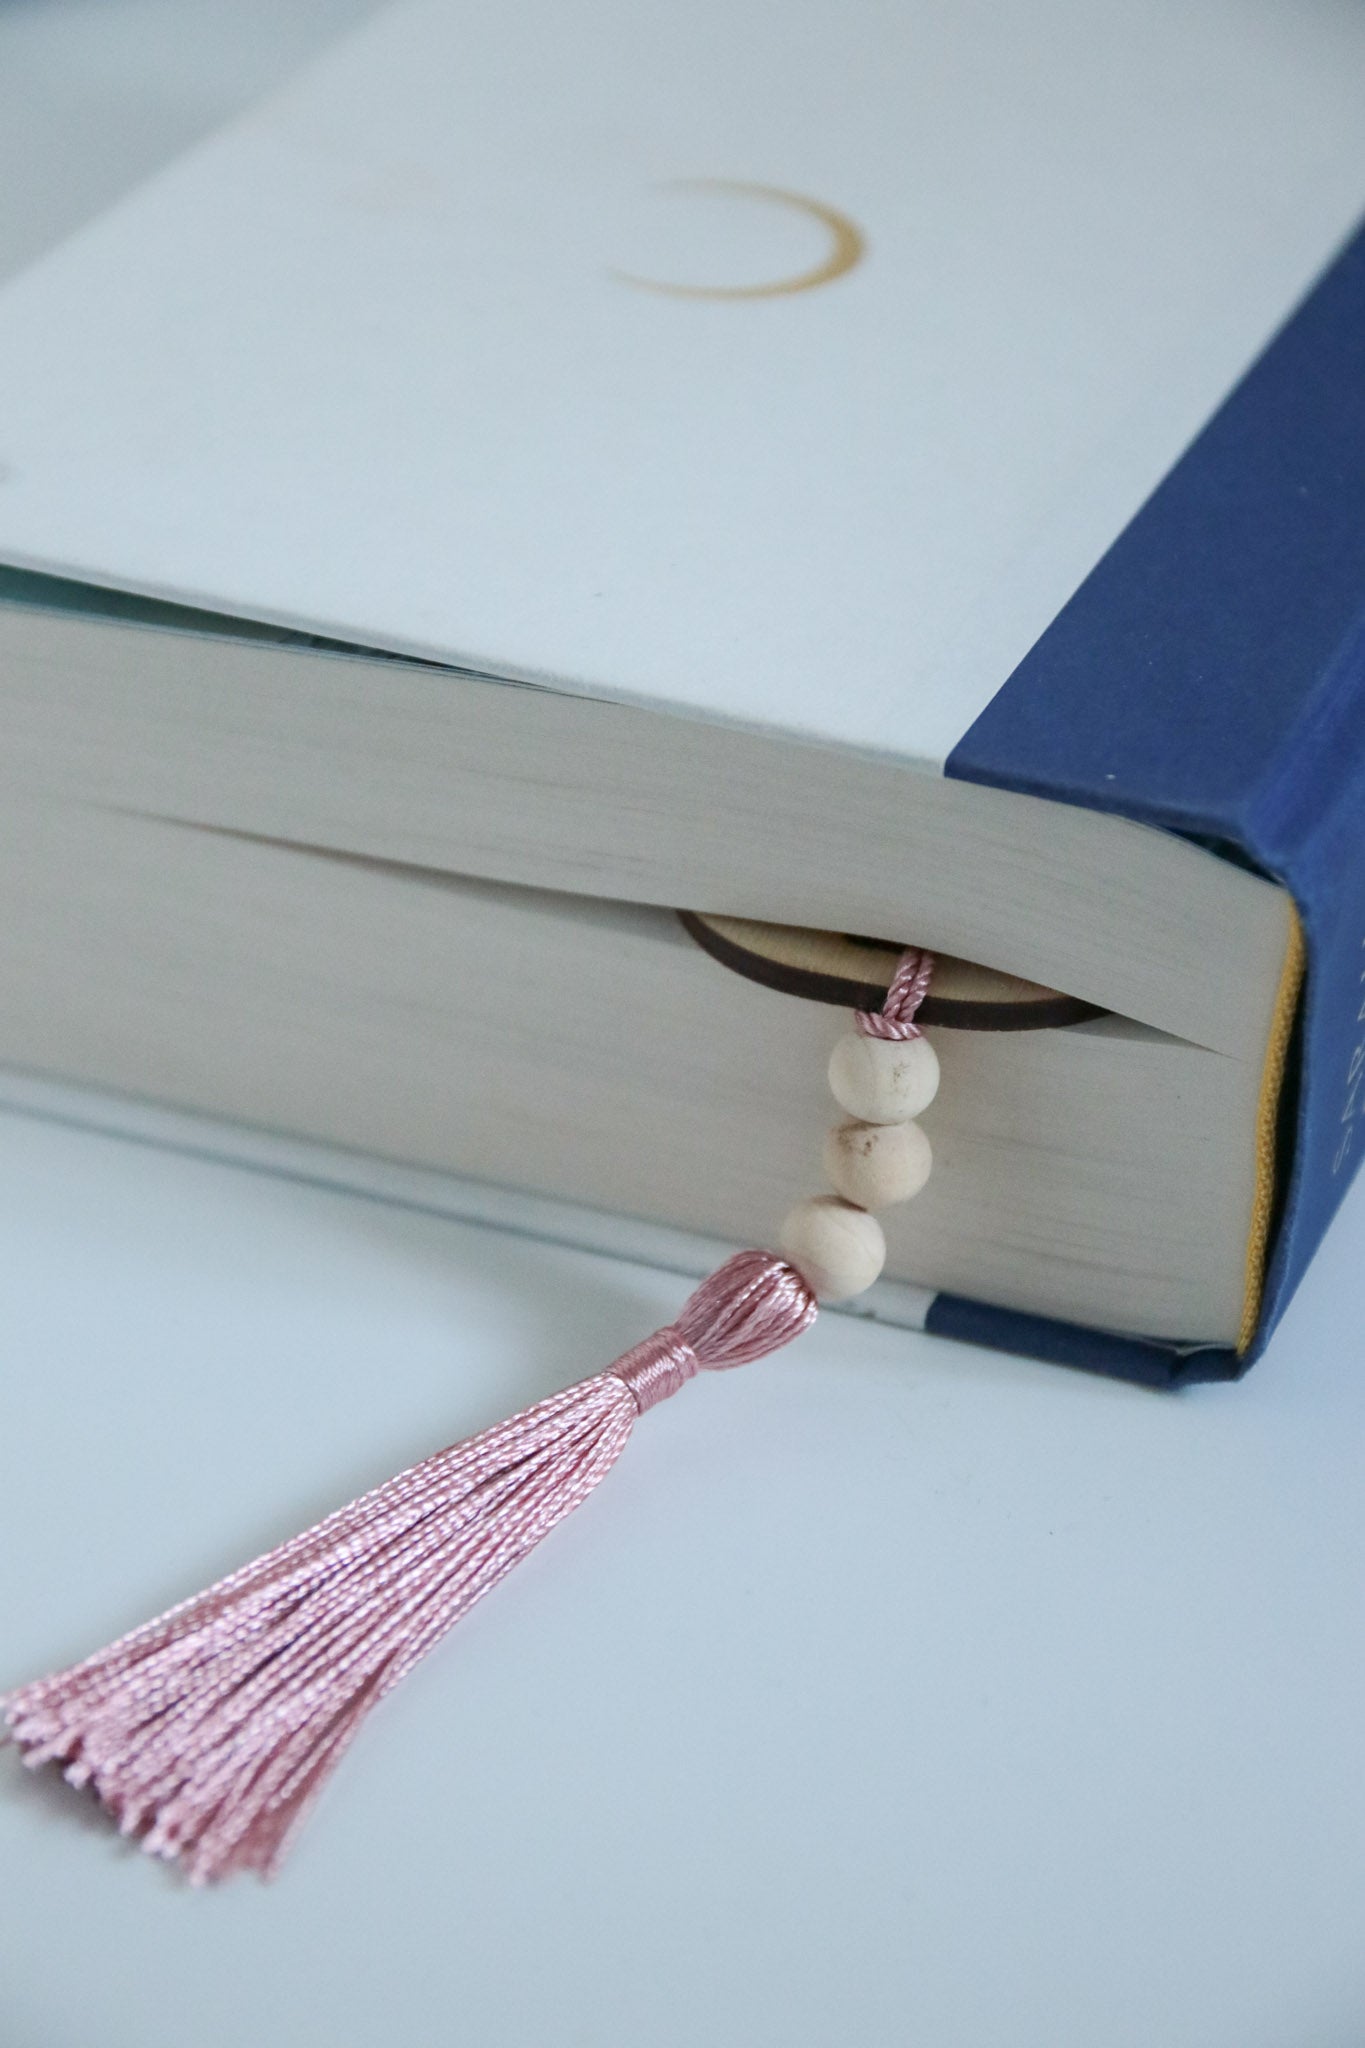 The Book is Always Better Engraved Bookmark